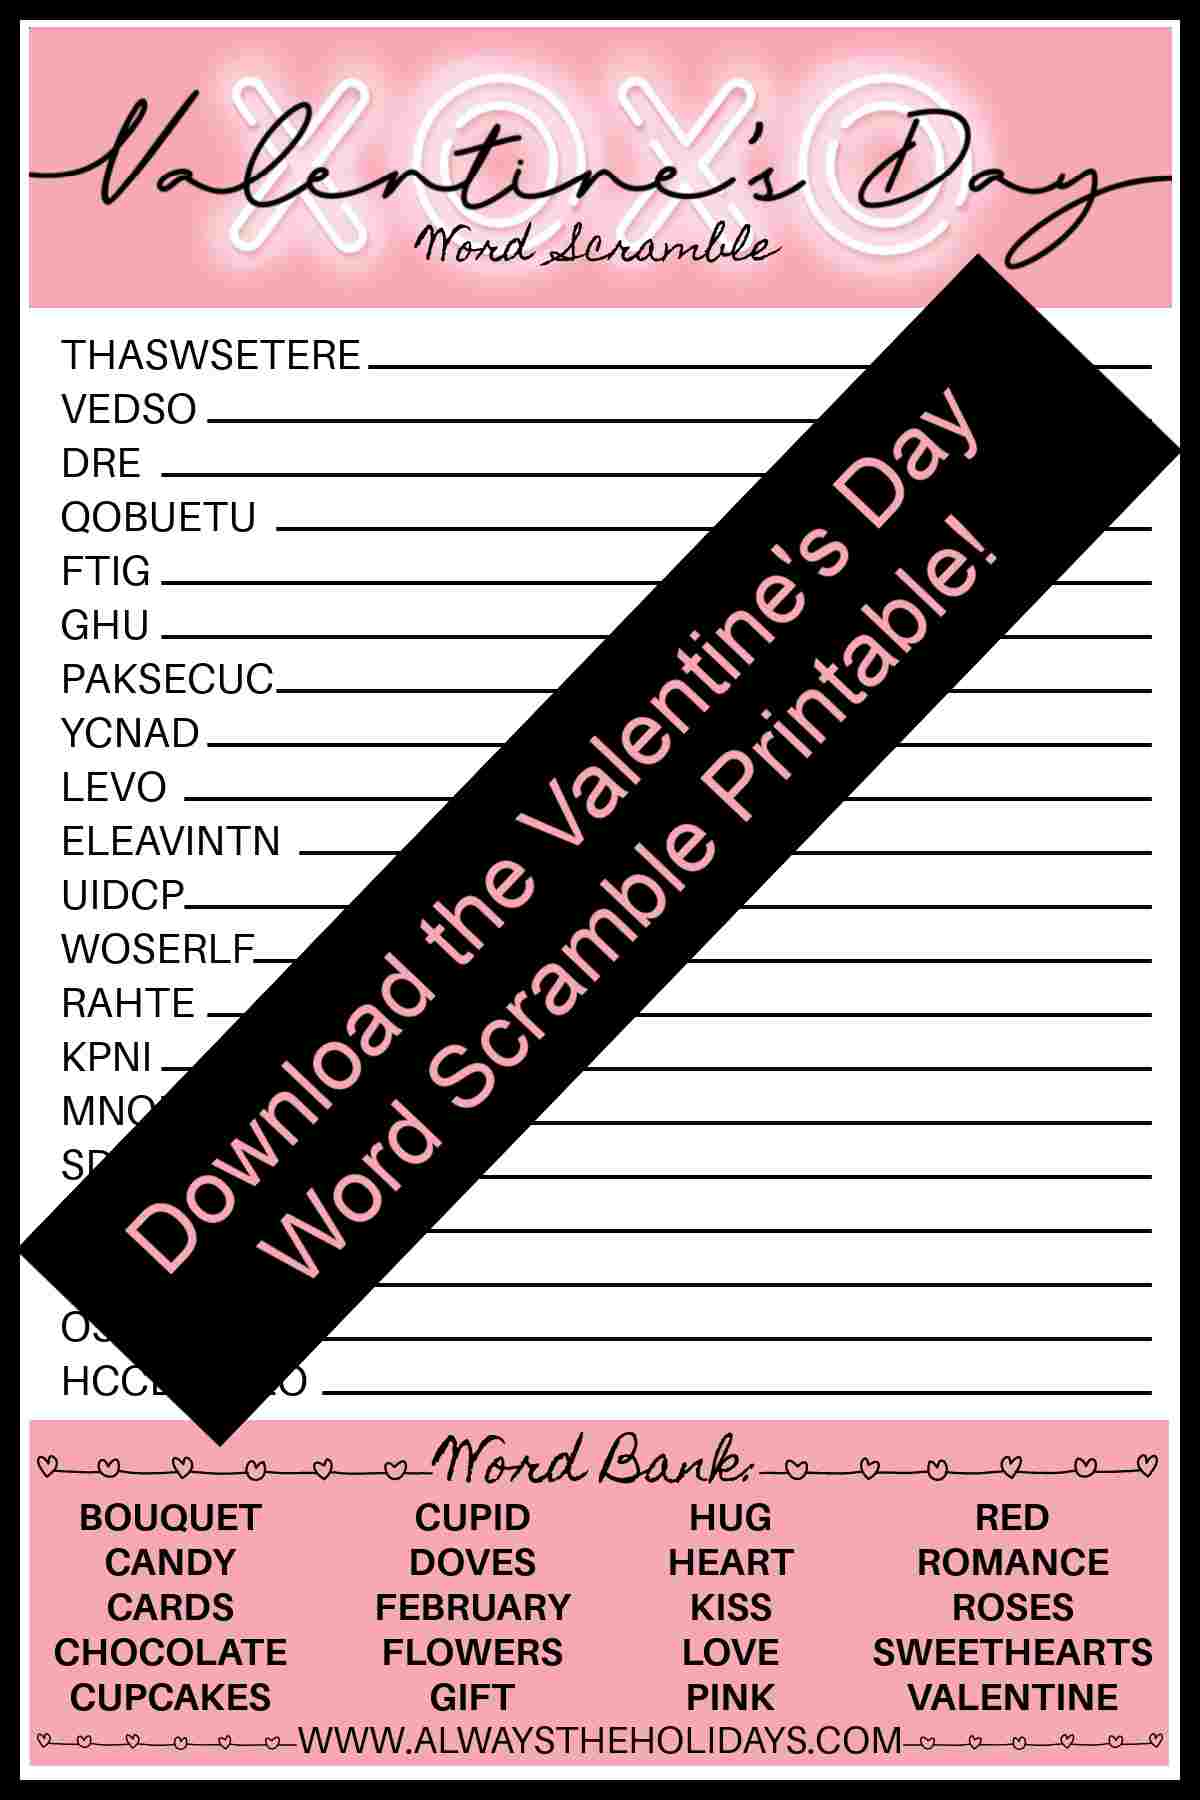 A Valentine's Day printable word scramble with a black bar across it that reads "Download the Valentine's Day word scramble printable" in pink lettering.